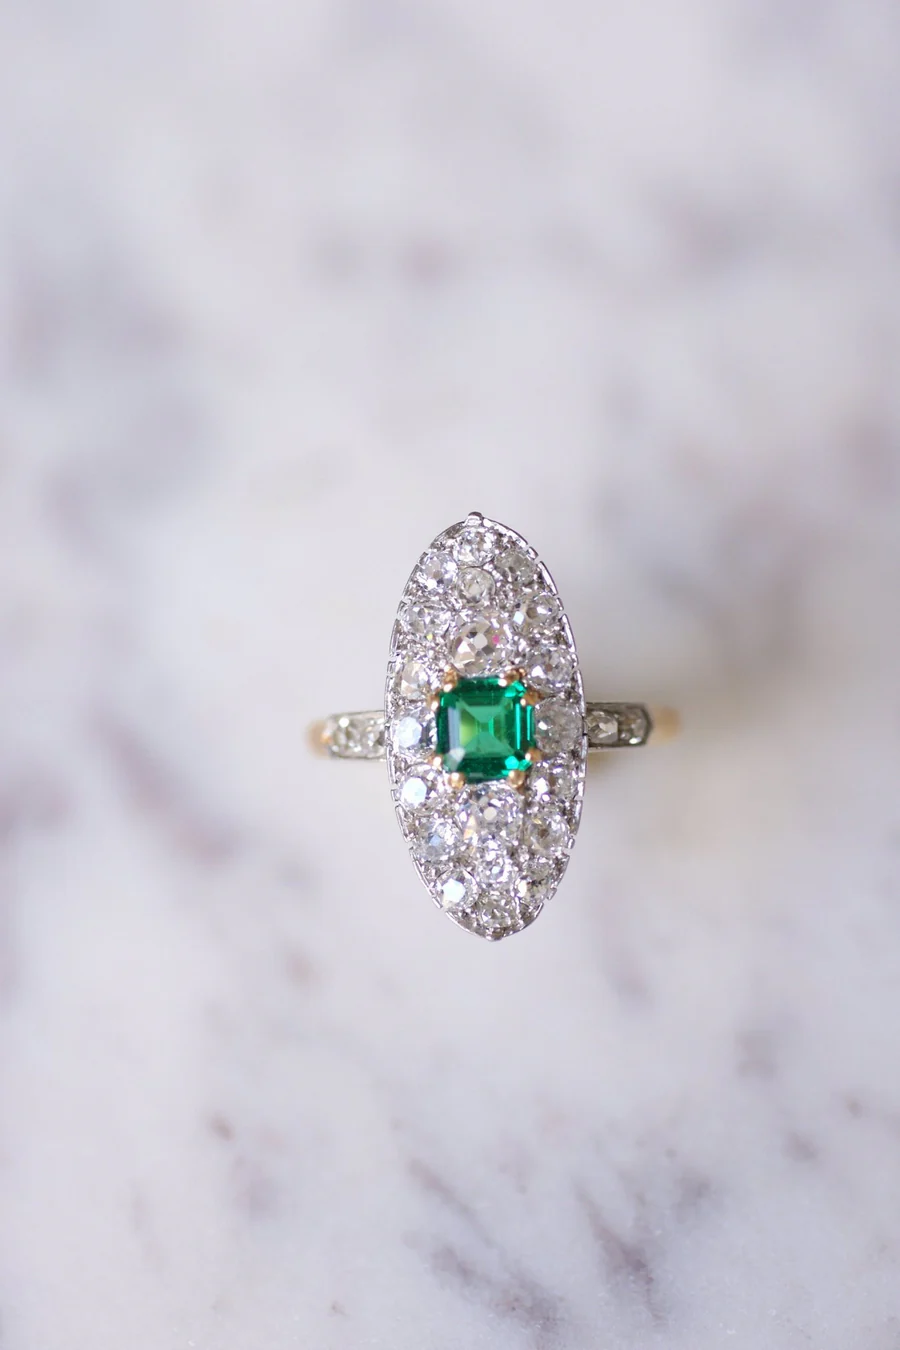 Marquise Belle Epoque emerald ring with diamonds on gold and platinum - Galerie Pénélope